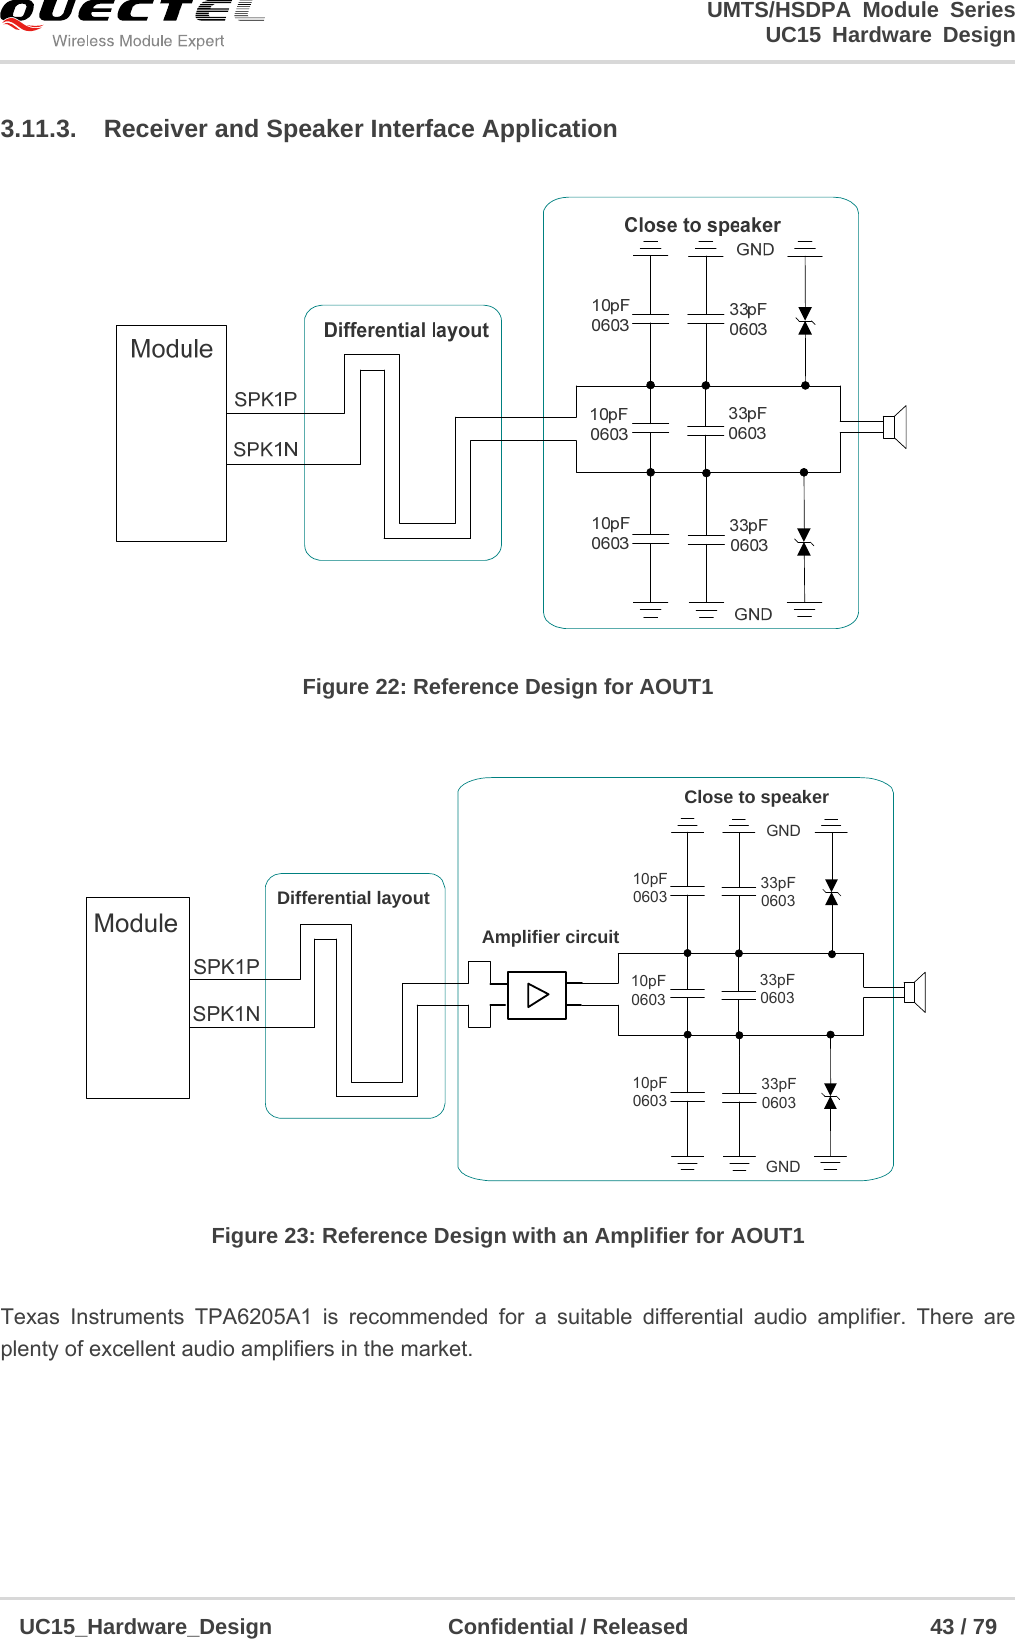                                                                        UMTS/HSDPA Module Series                                                                 UC15 Hardware Design  UC15_Hardware_Design                Confidential / Released                      43 / 79    3.11.3.  Receiver and Speaker Interface Application    Figure 22: Reference Design for AOUT1 SPK1PSPK1NDifferential layoutAmplifier circuitModule10pF 0603Close to speakerGND33pF 060333pF 0603GND10pF 060310pF 060333pF 0603 Figure 23: Reference Design with an Amplifier for AOUT1  Texas Instruments TPA6205A1 is recommended for a suitable differential audio amplifier. There are plenty of excellent audio amplifiers in the market.   